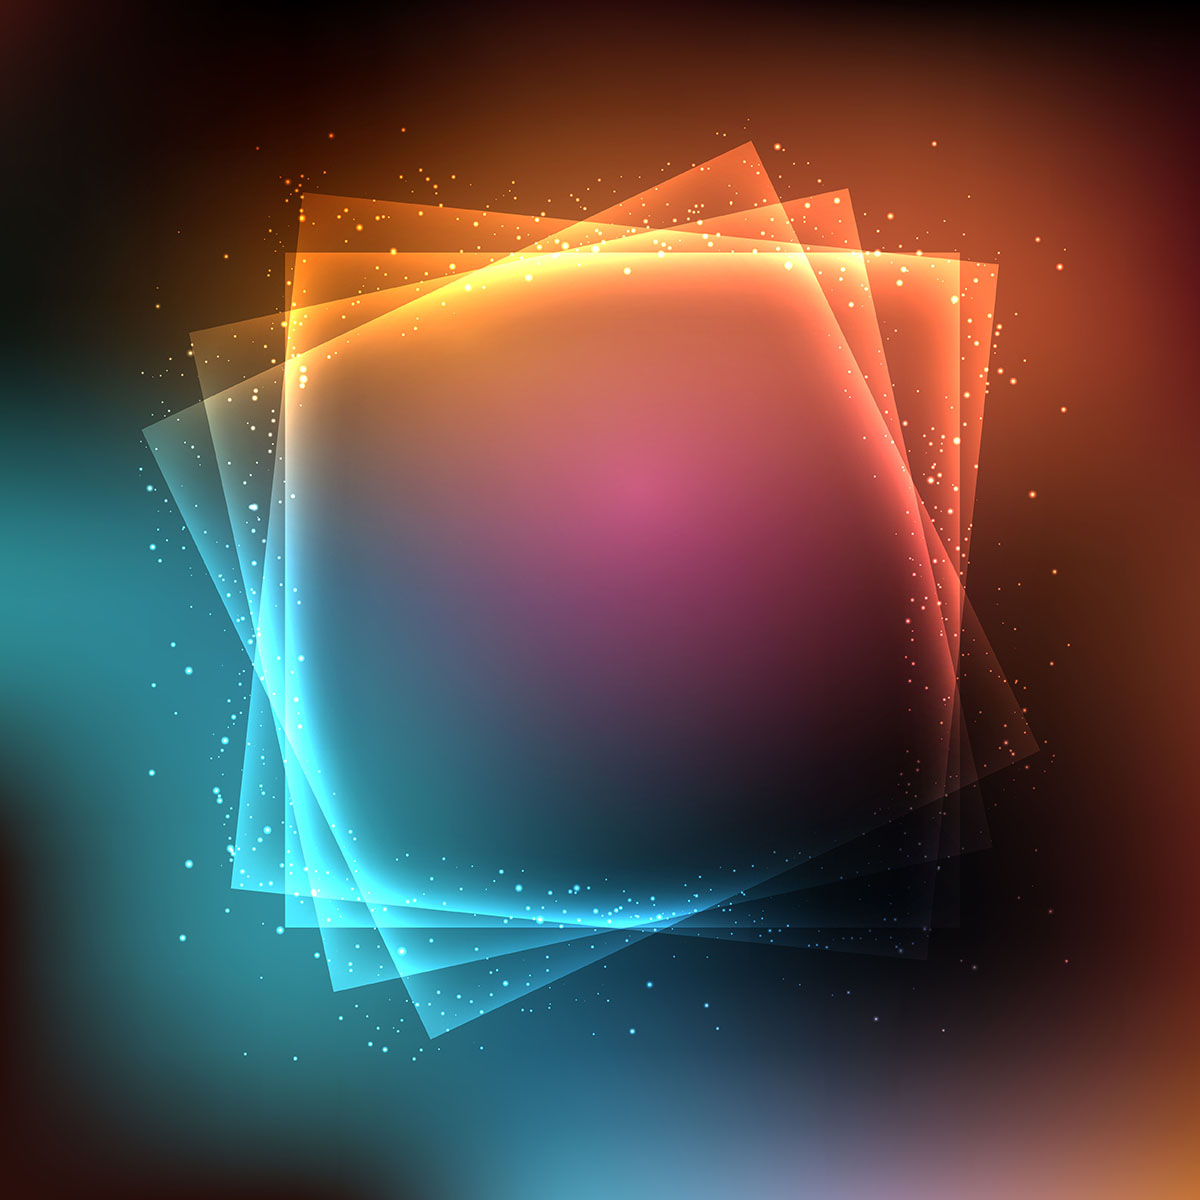 abstract lights download vectors photo frame background